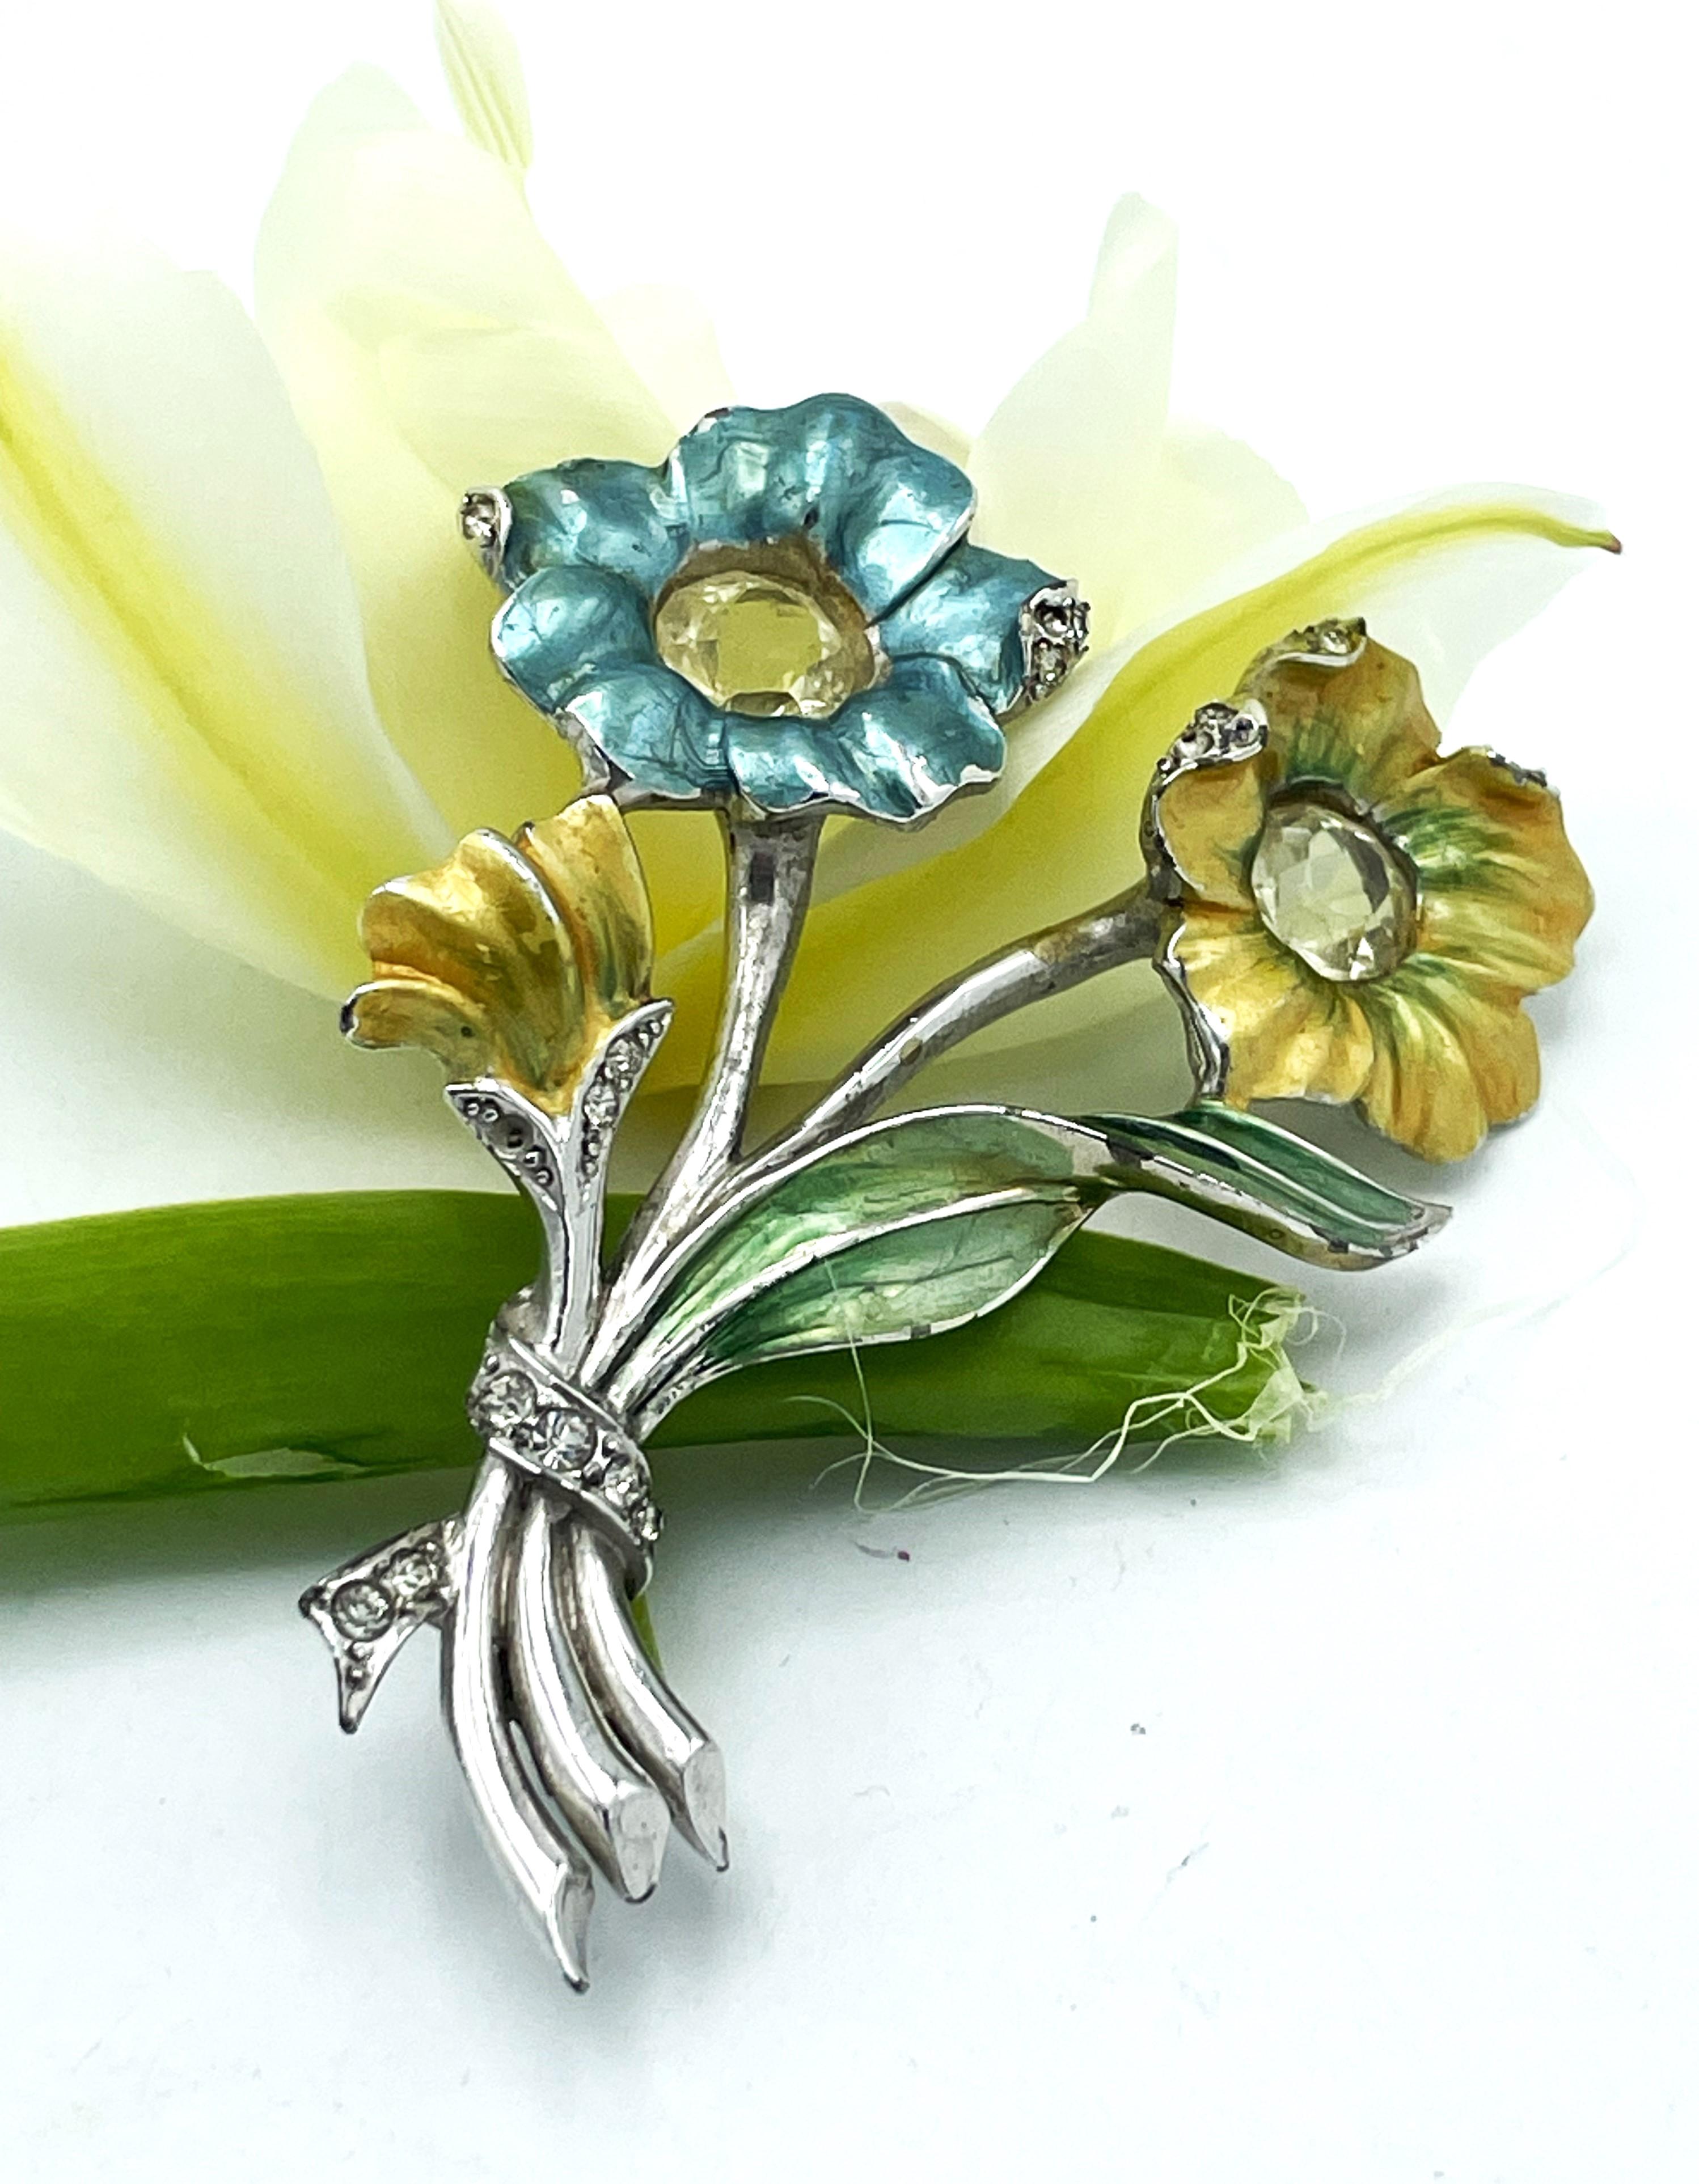 Brooch with 2 flowers by Marcel Boucher, enamelled in light blue and yellow, a large cut rhinestone as a pistil.

Dimenstions:
Height 7cm
Width 5cm
Diameter of the 2 flowers approx. 2 cm
About
Material rhodium-plated metal and rhinestones
Signed MB,